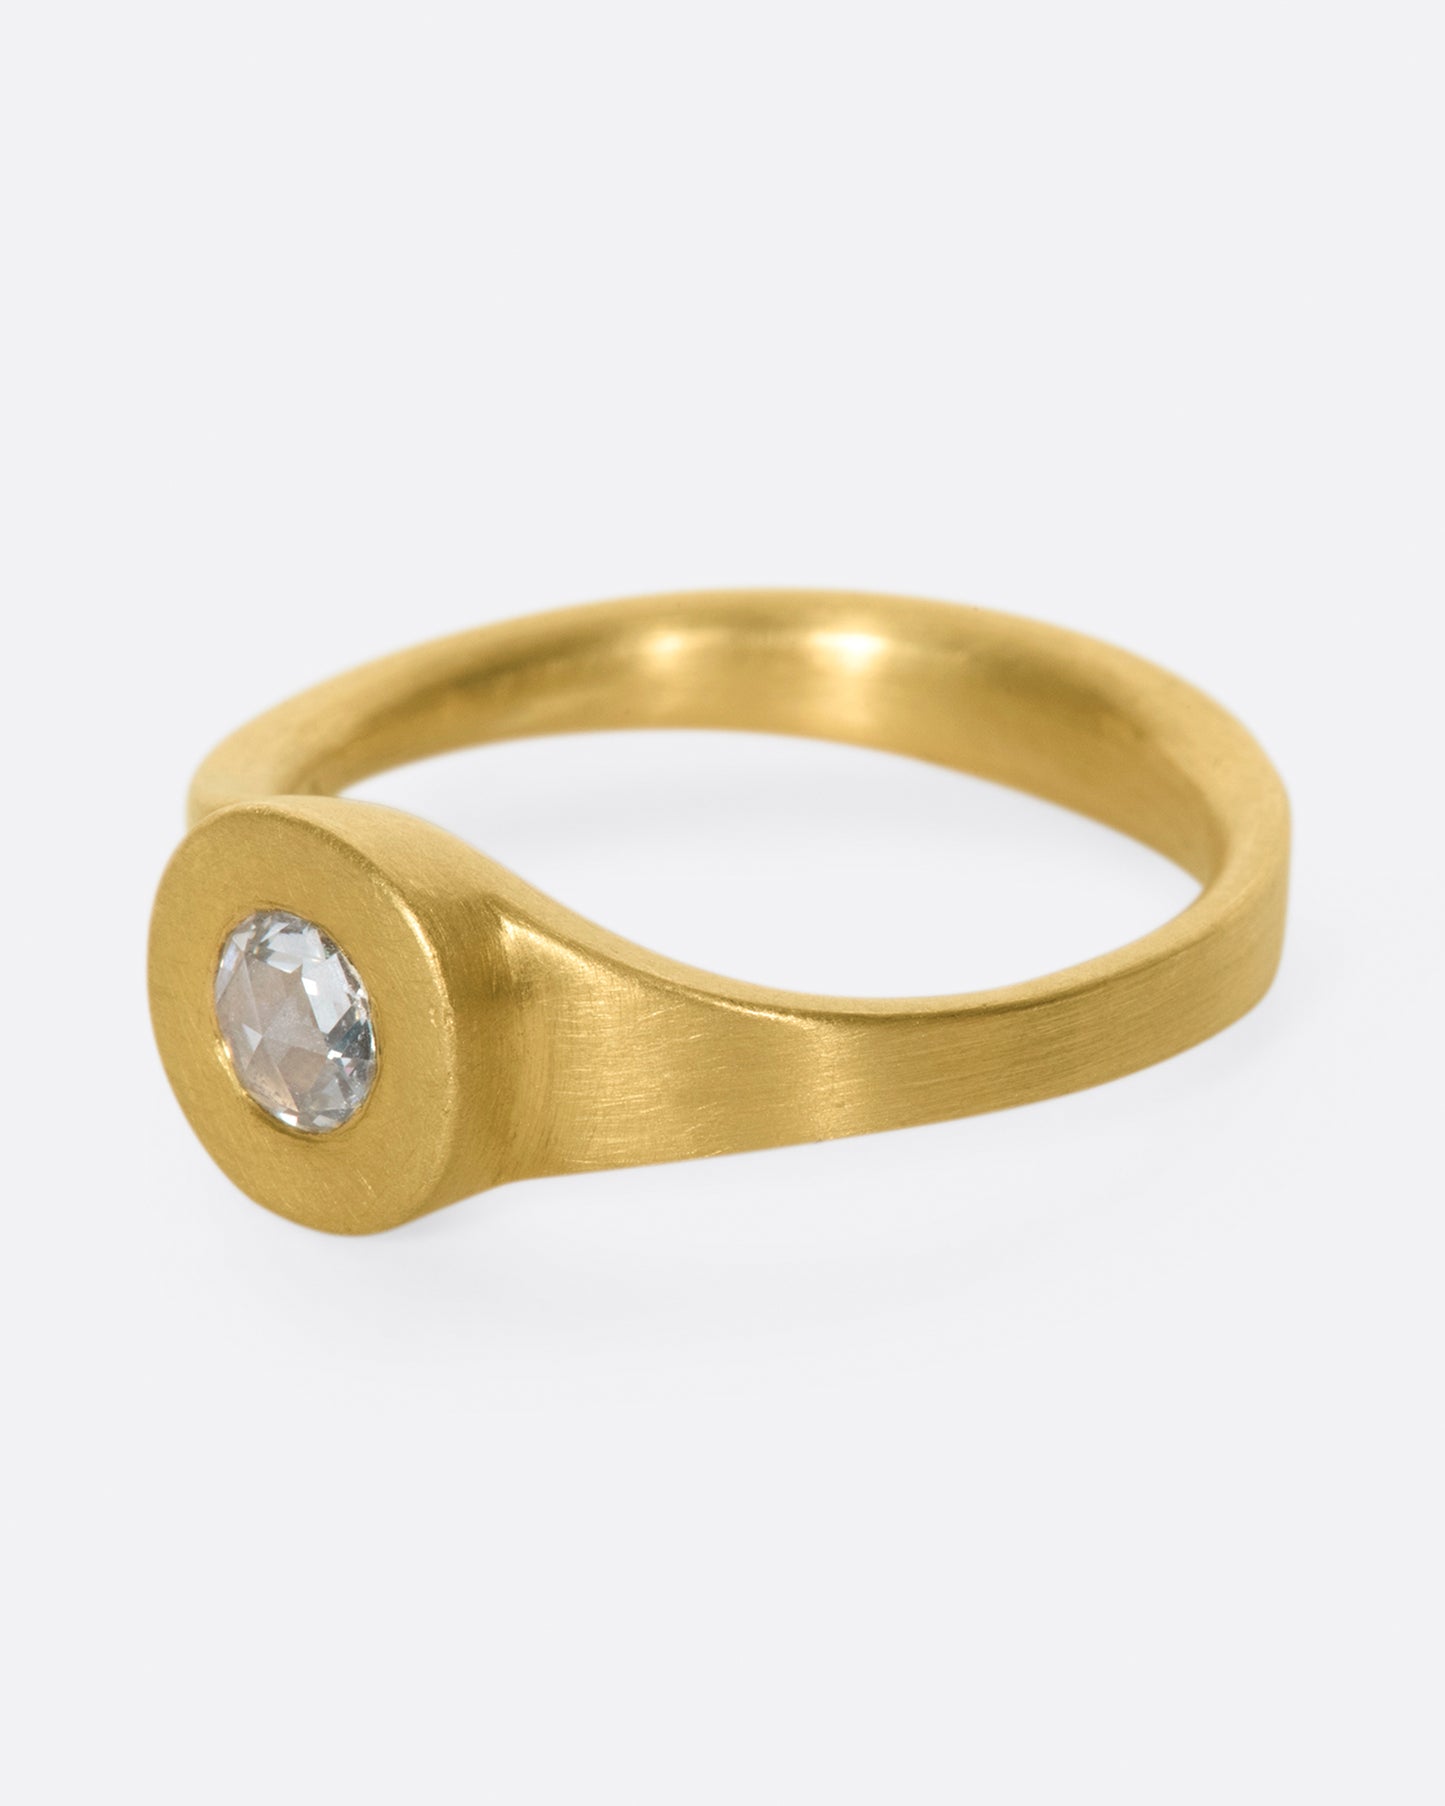 A rose cut diamond sits at the center of this hand carved, matte gold ring.